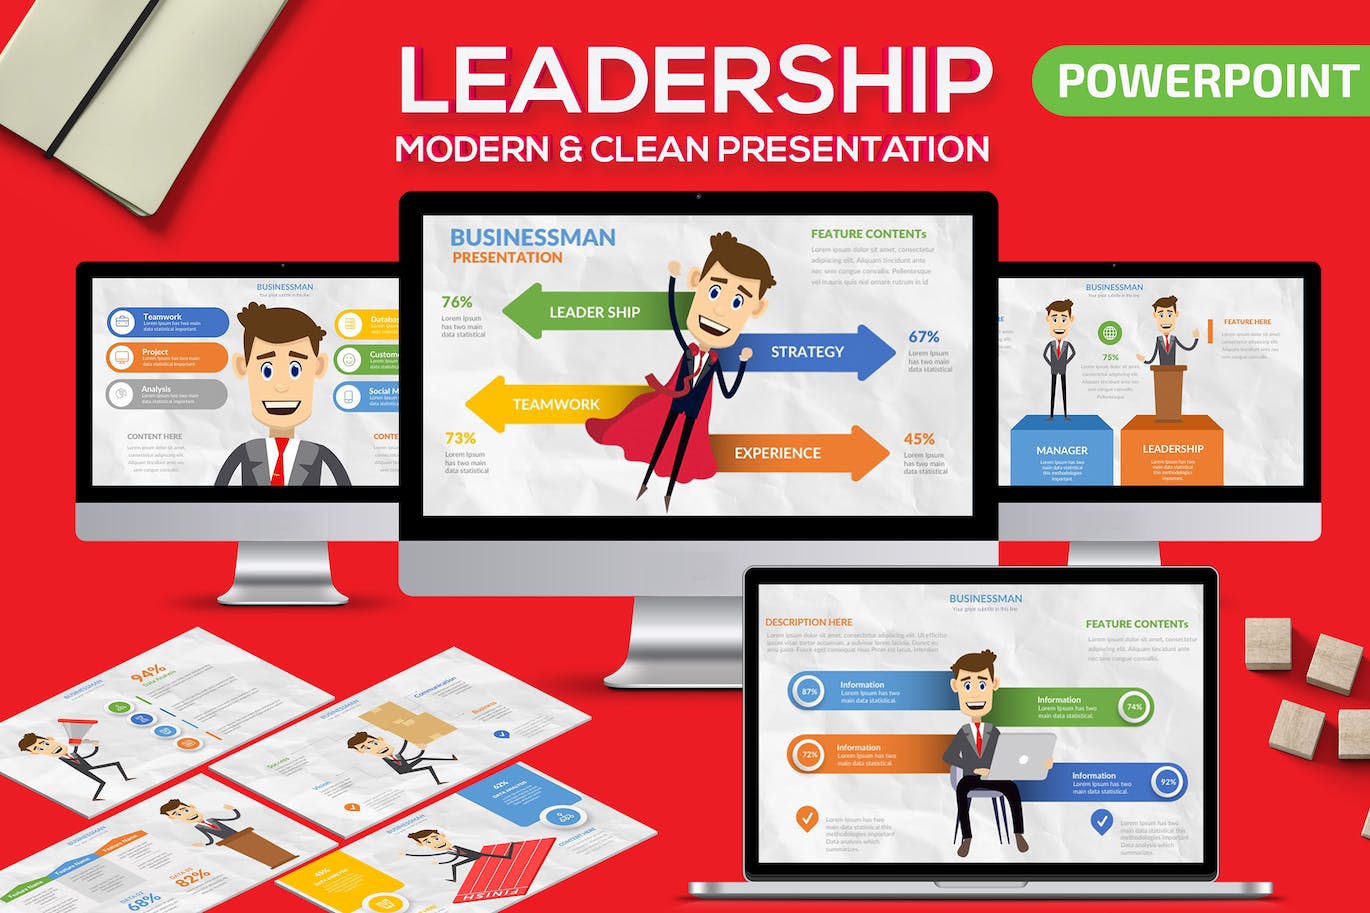 Collection of images of colorful presentation template slides on the theme of leadership.